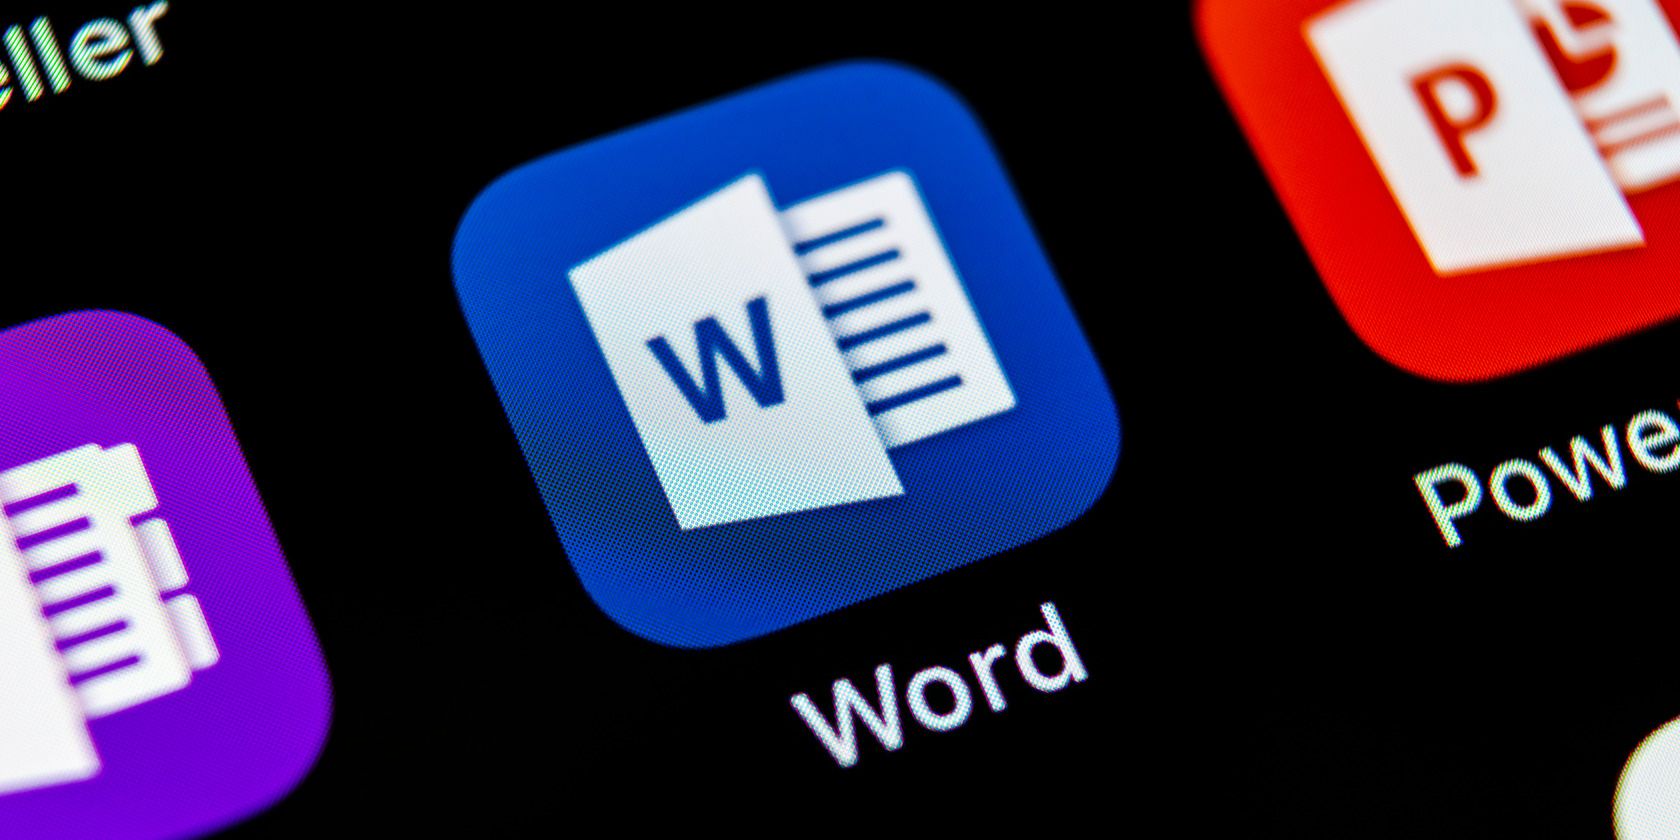 Microsoft word application icon on a black background screen close-up